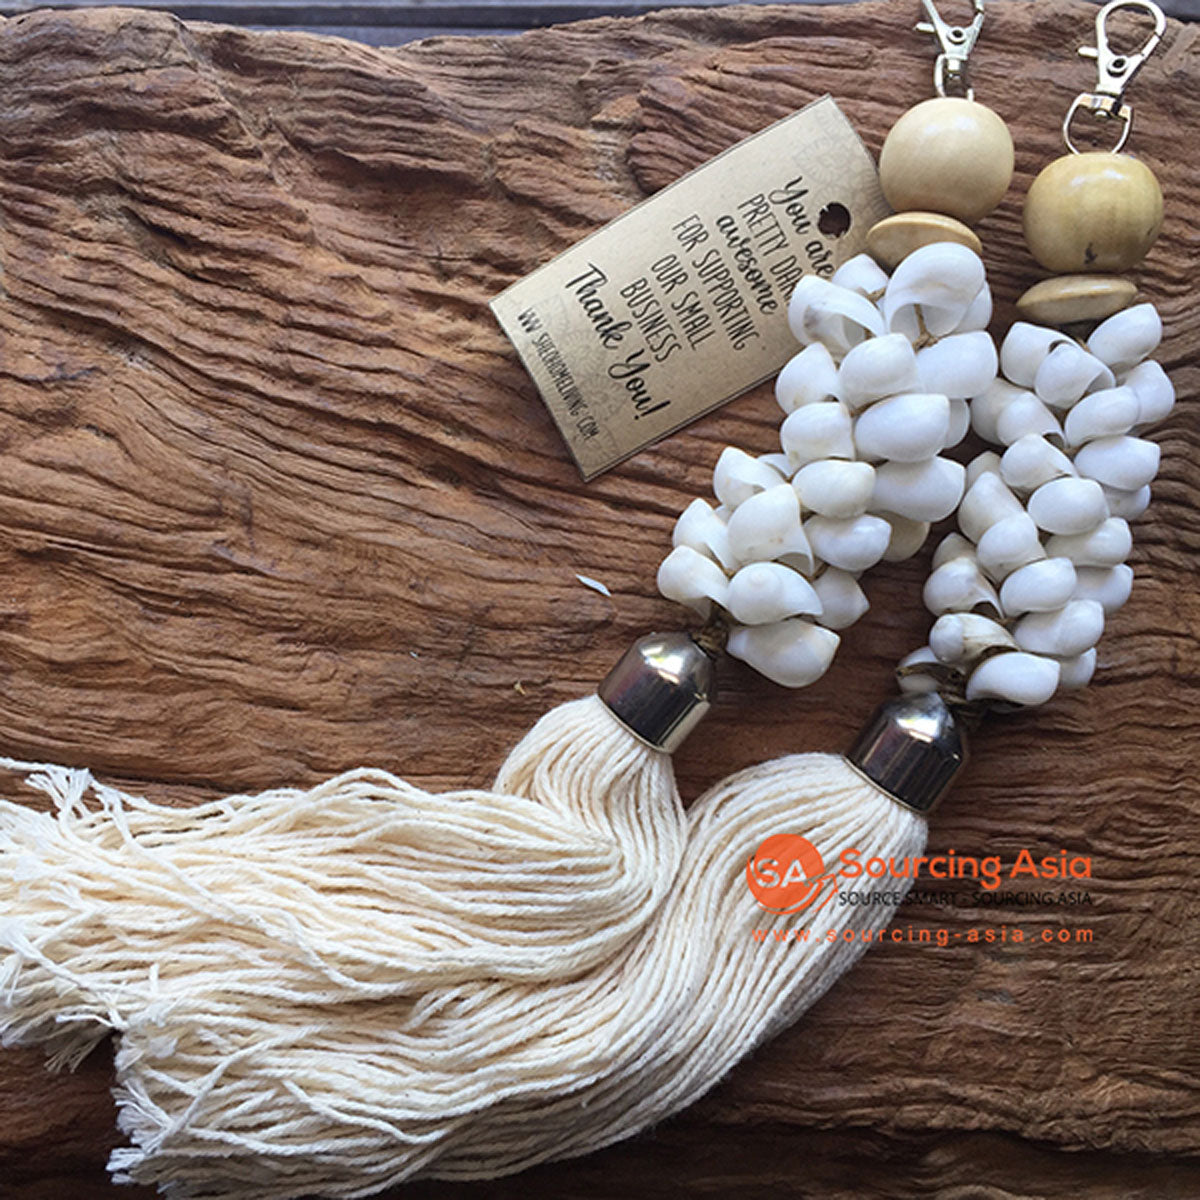 SHL045-2 WHITE COWRIE SHELL KEY RING WITH CREAM GARLAND